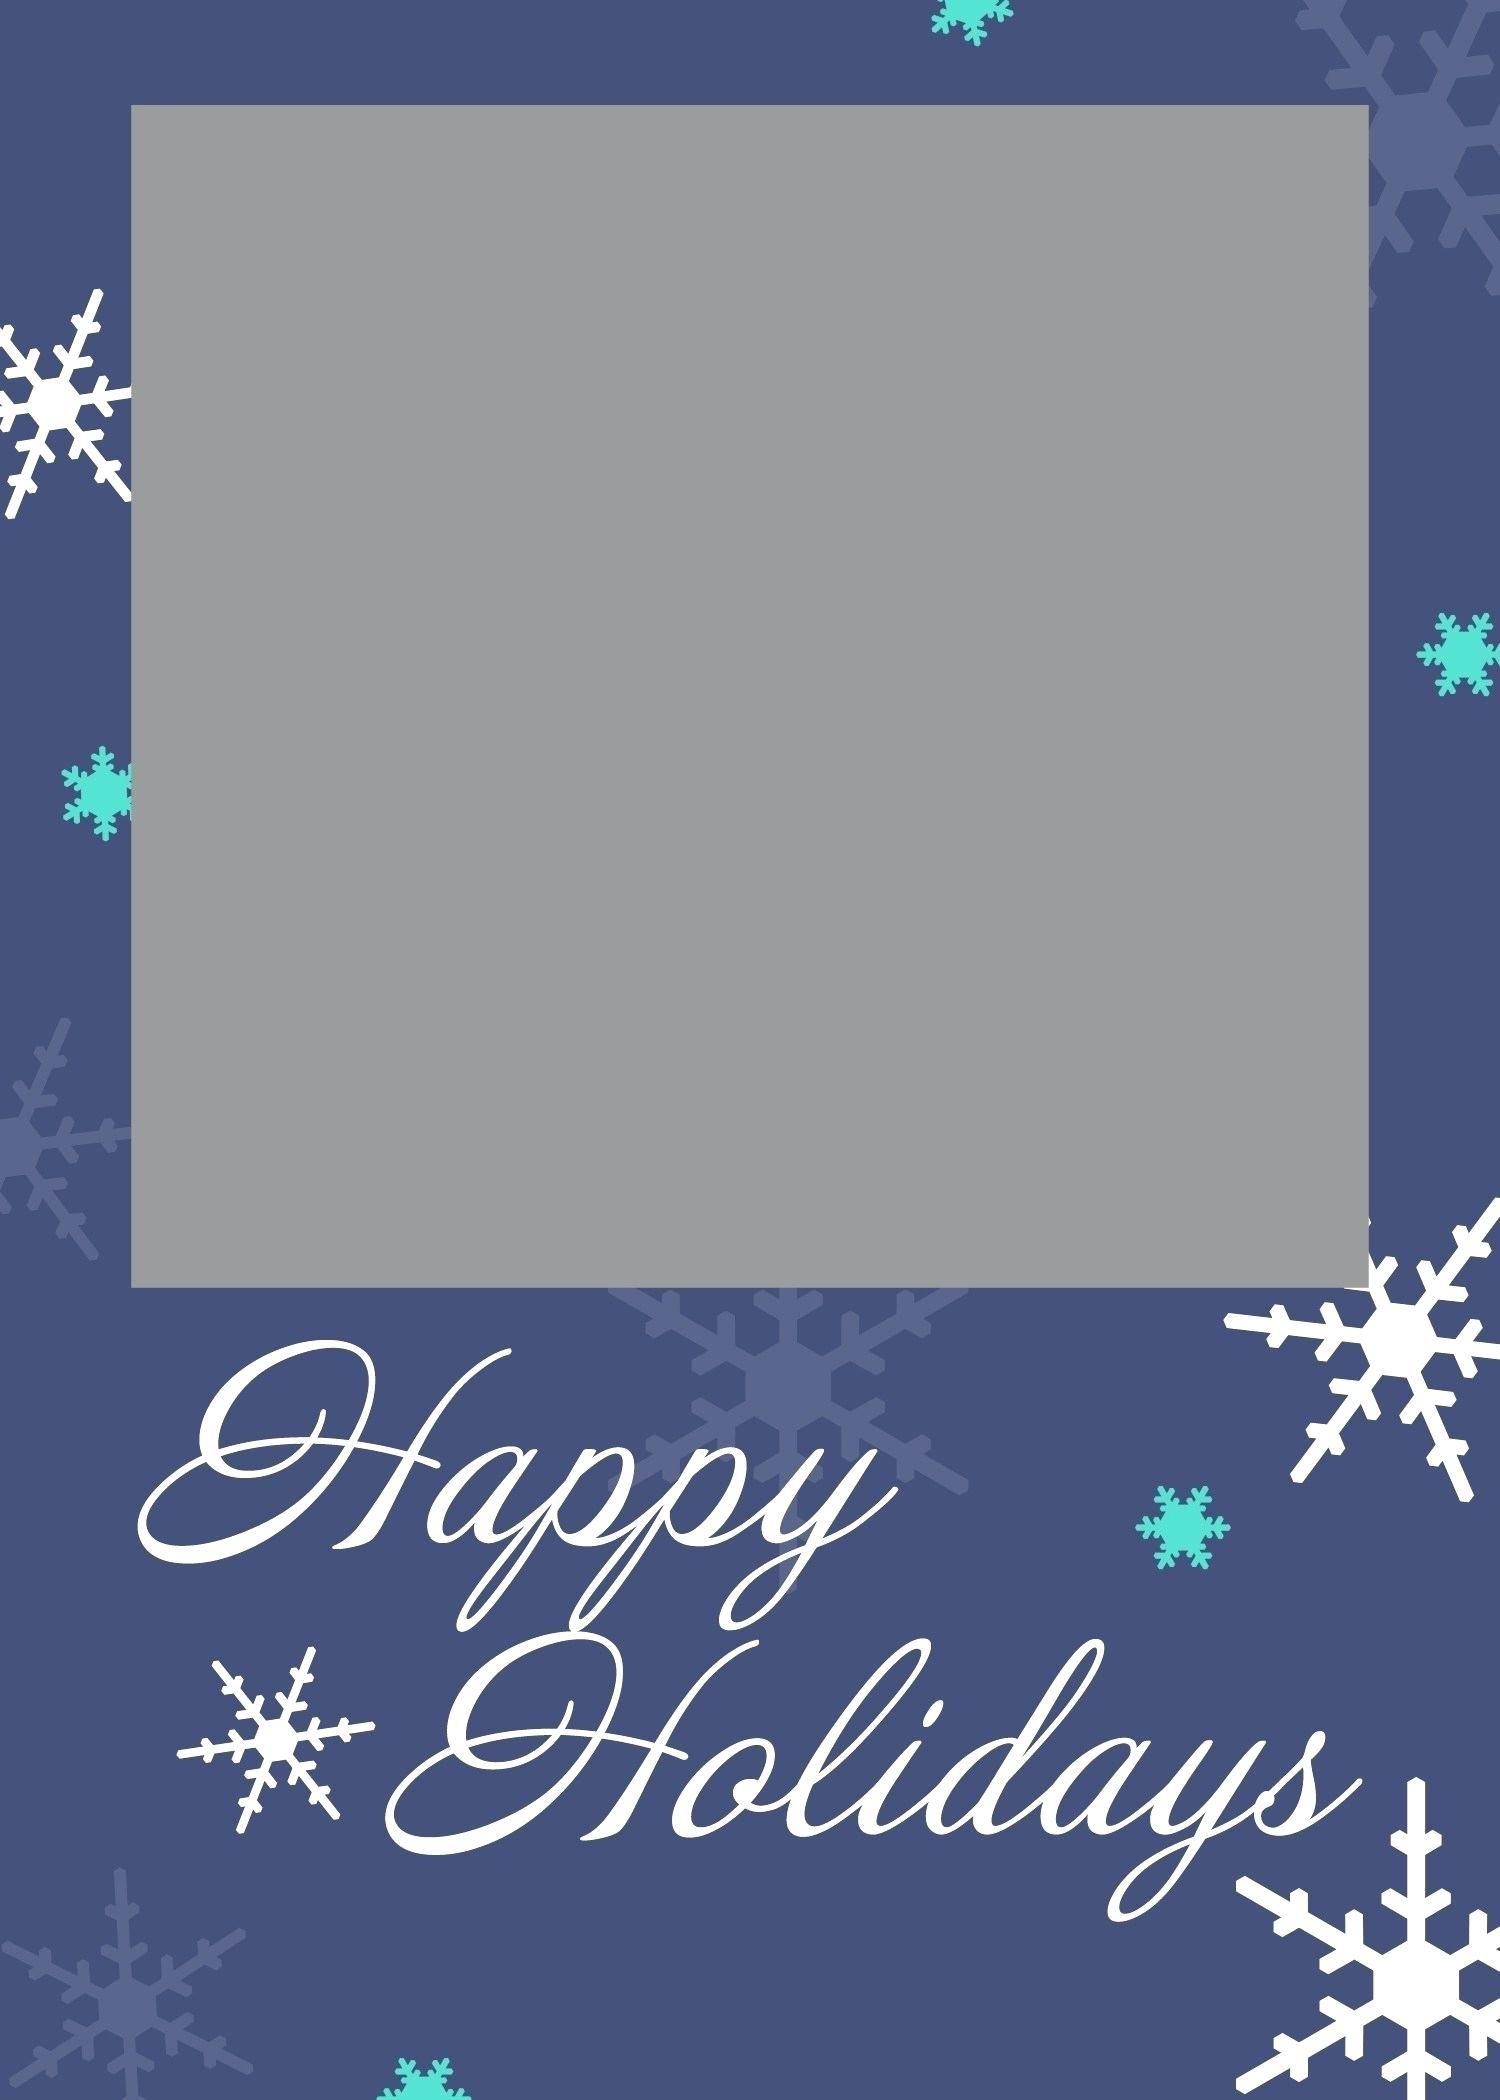 Free Holiday Card Templates Business Template Save Of Unique With Free Holiday Photo Card Templates